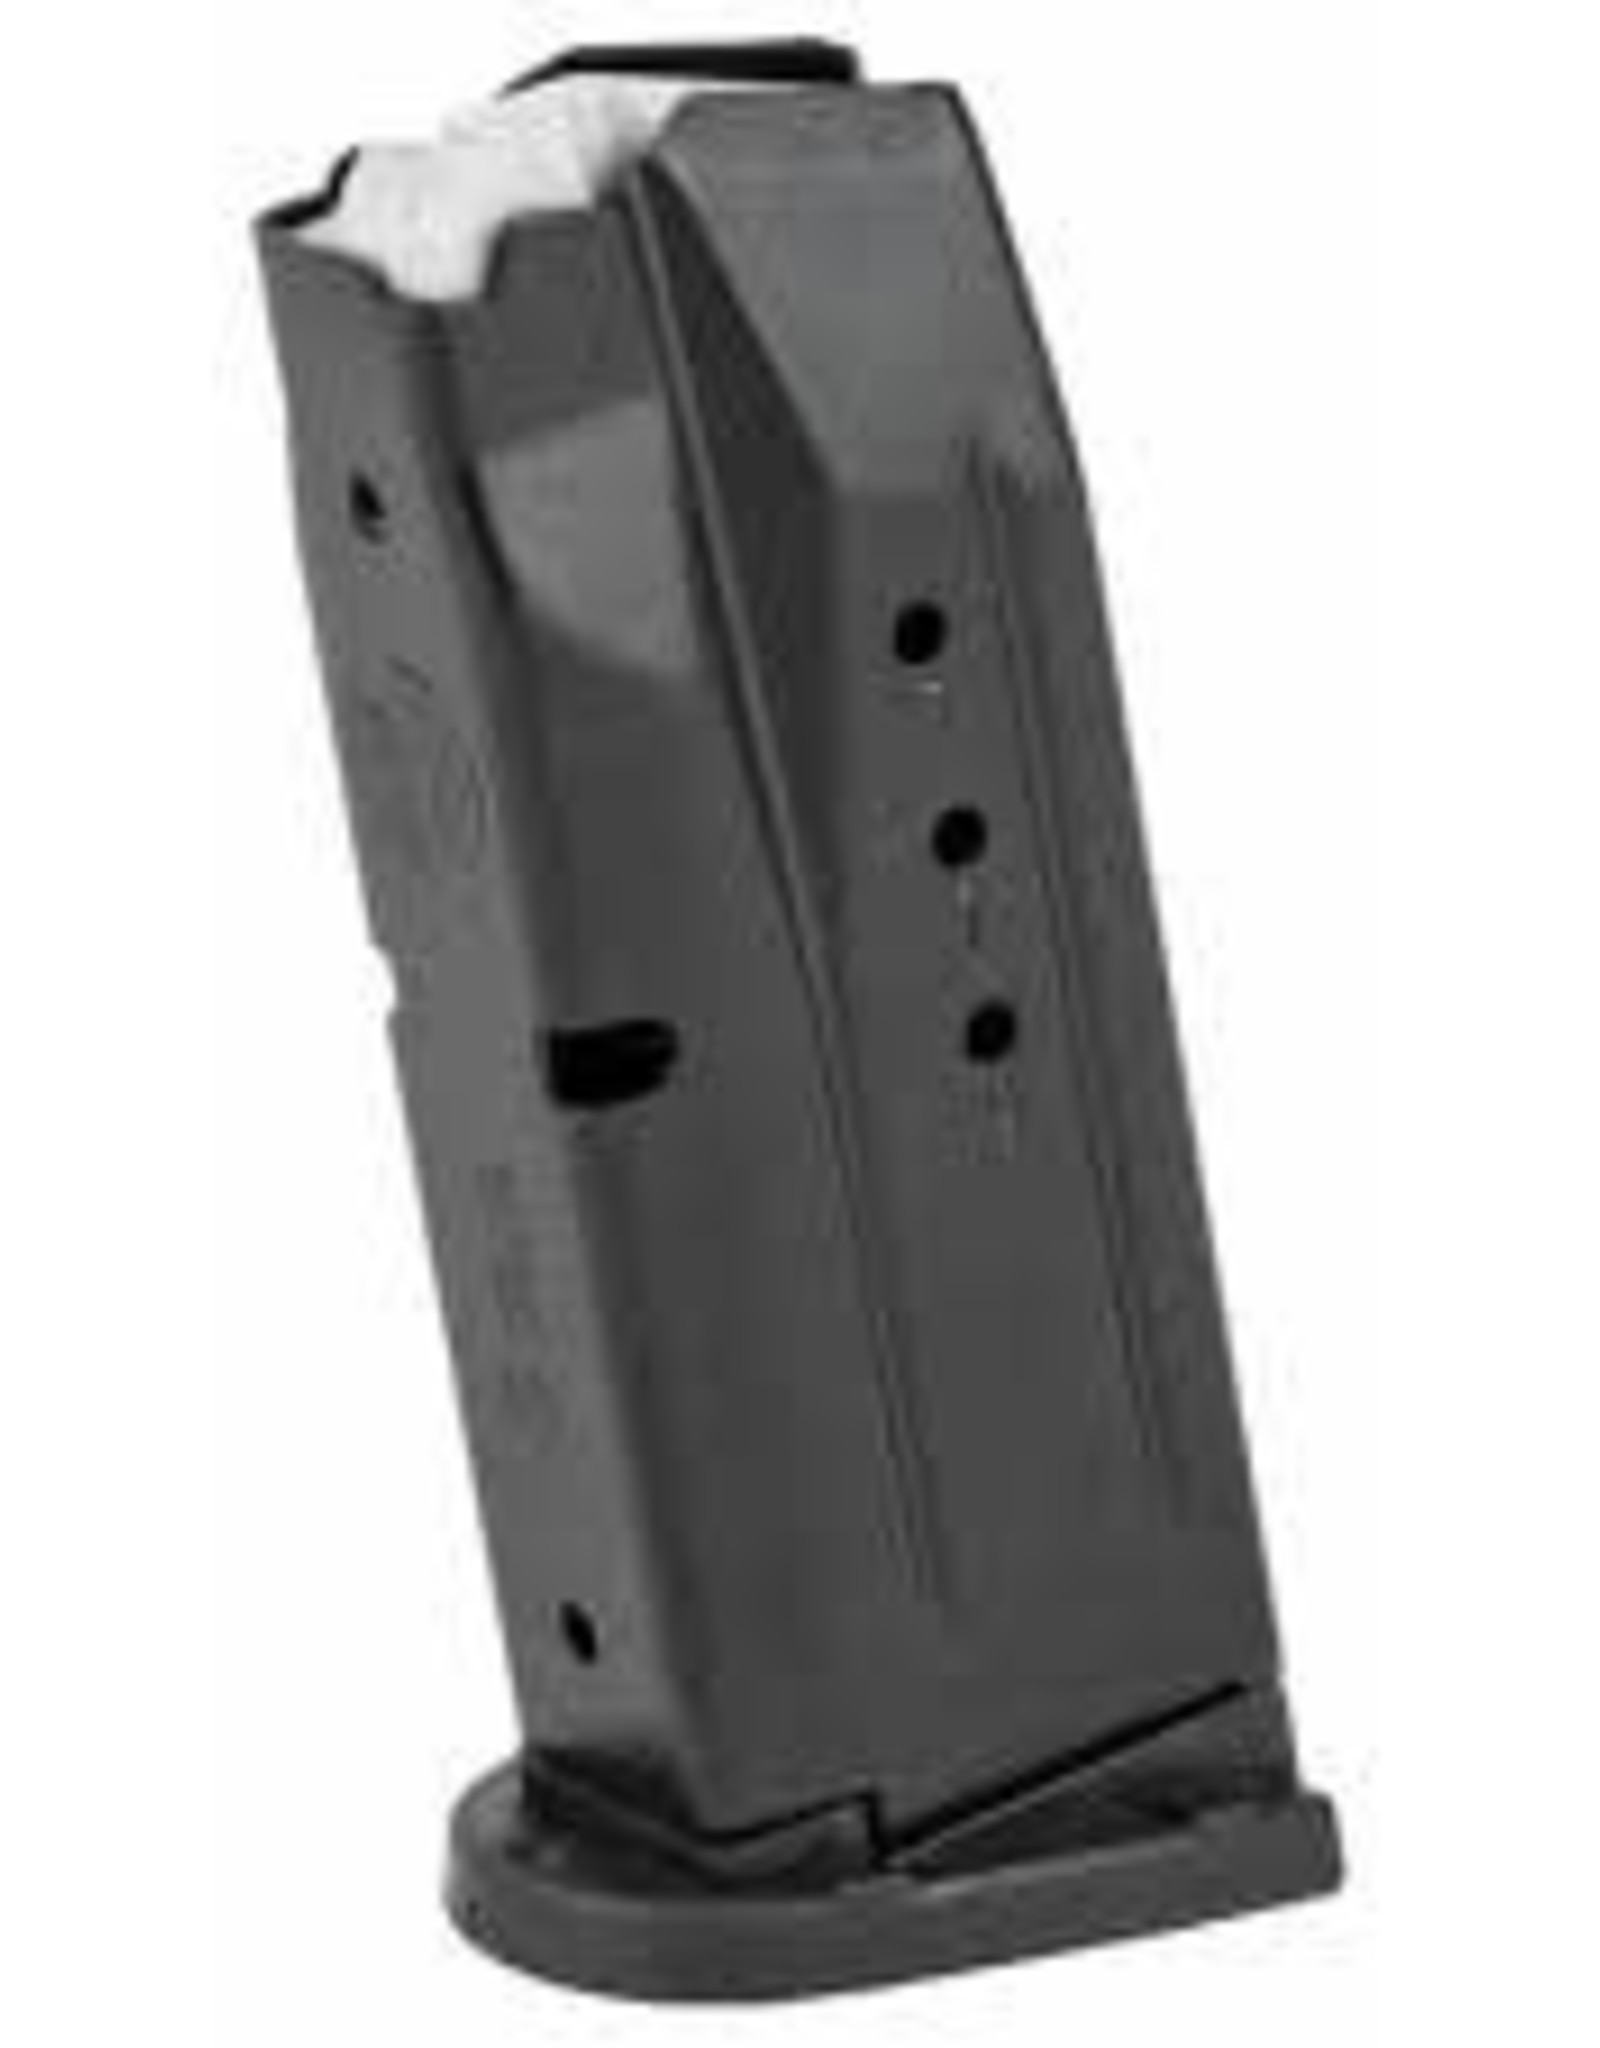 Smith & Wesson 10-RD M&P MAGAZINE 9MM COMPACT